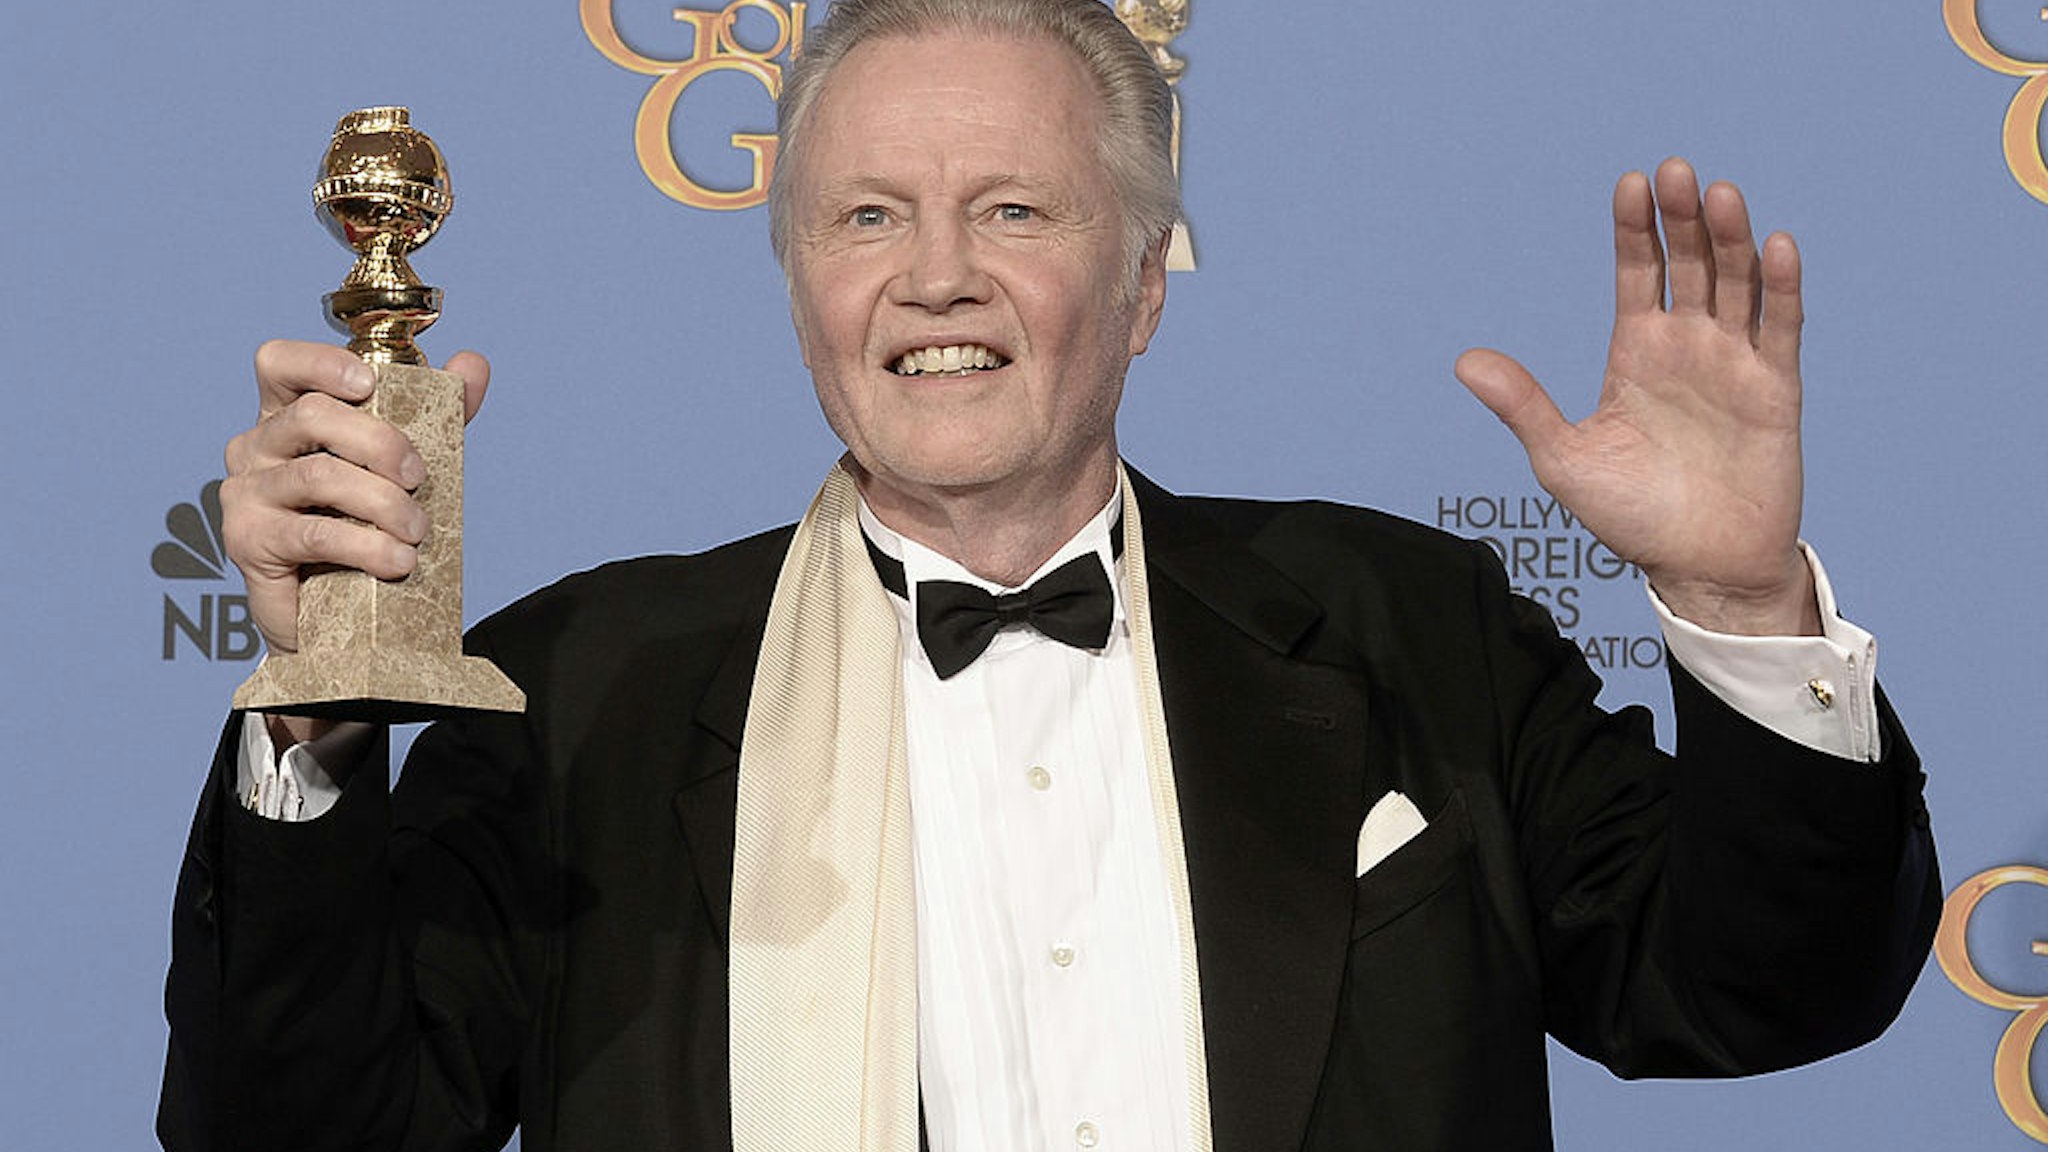 BEVERLY HILLS, CA - JANUARY 12: Actor Jon Voight, winner of Best Supporting Actor in a Series, Miniseries, or Television Film for 'Ray Donovan,' poses in the press room during the 71st Annual Golden Globe Awards held at The Beverly Hilton Hotel on January 12, 2014 in Beverly Hills, California. (Photo by Kevin Winter/Getty Images)